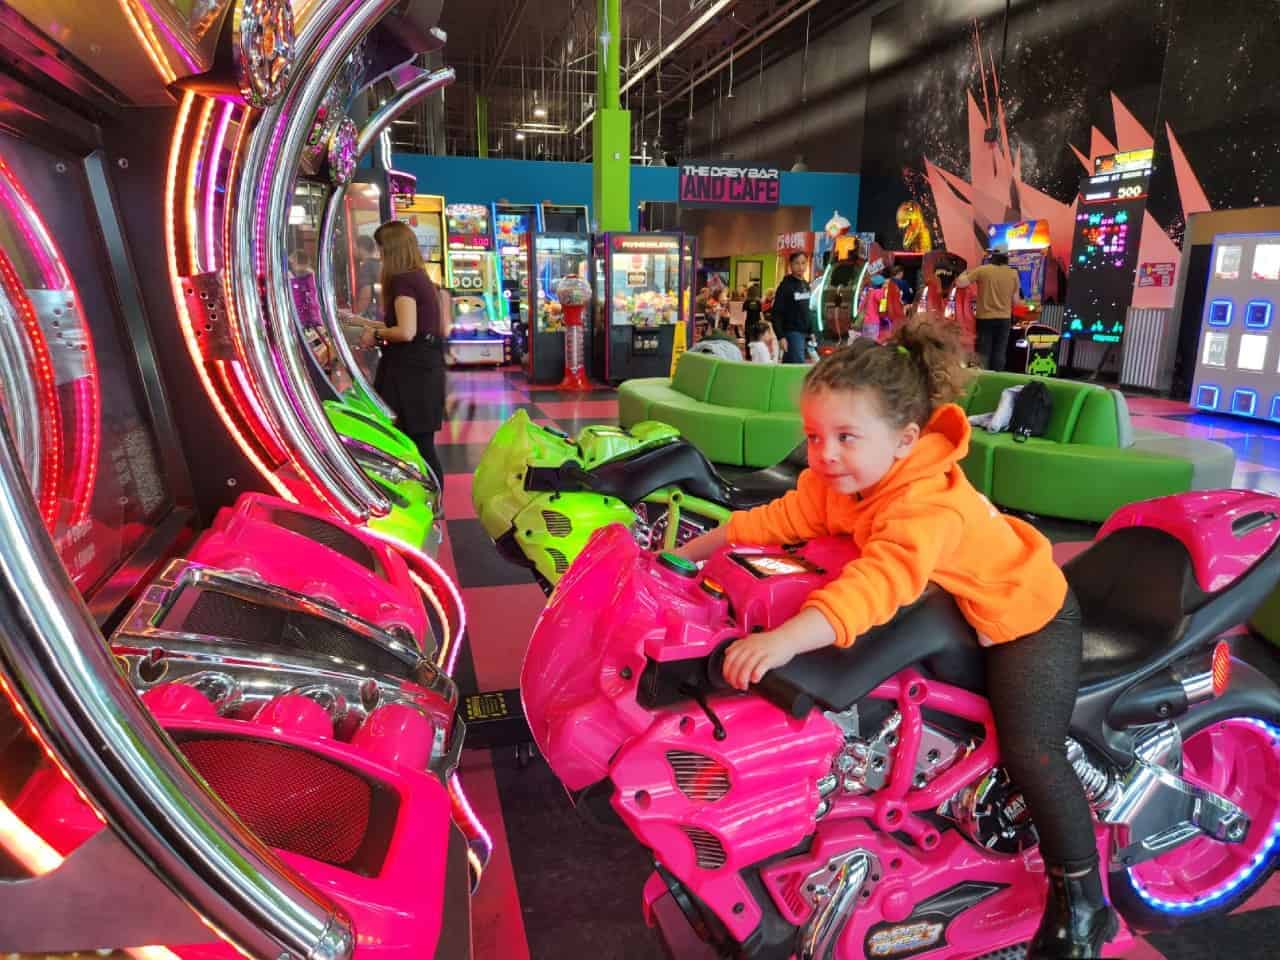 Flying Squirrel Arcade Fun in Calgary  - Arcade games are always a hit, and the Flying Squirrel has a bunch of fun options for some alternatives to jumping all day